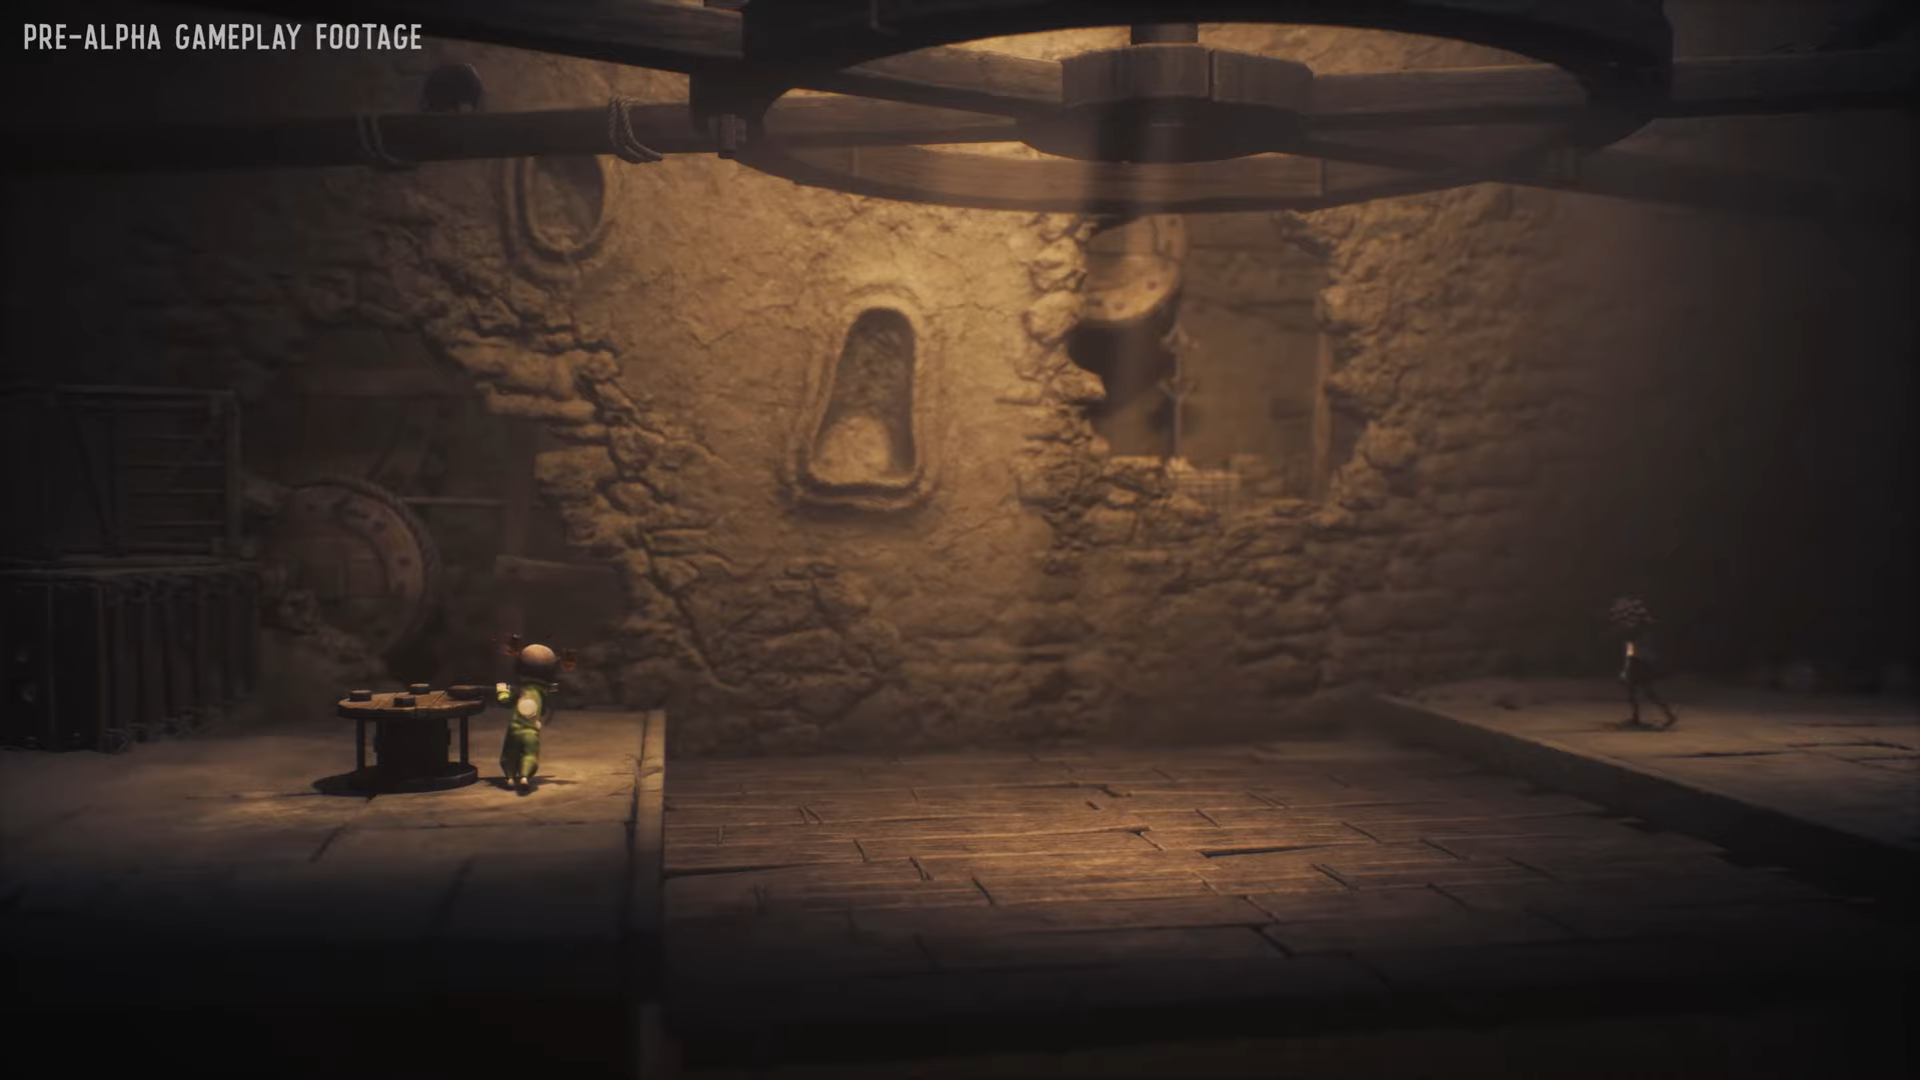 Little Nightmares 3 video shows 18 minutes of co-op gameplay